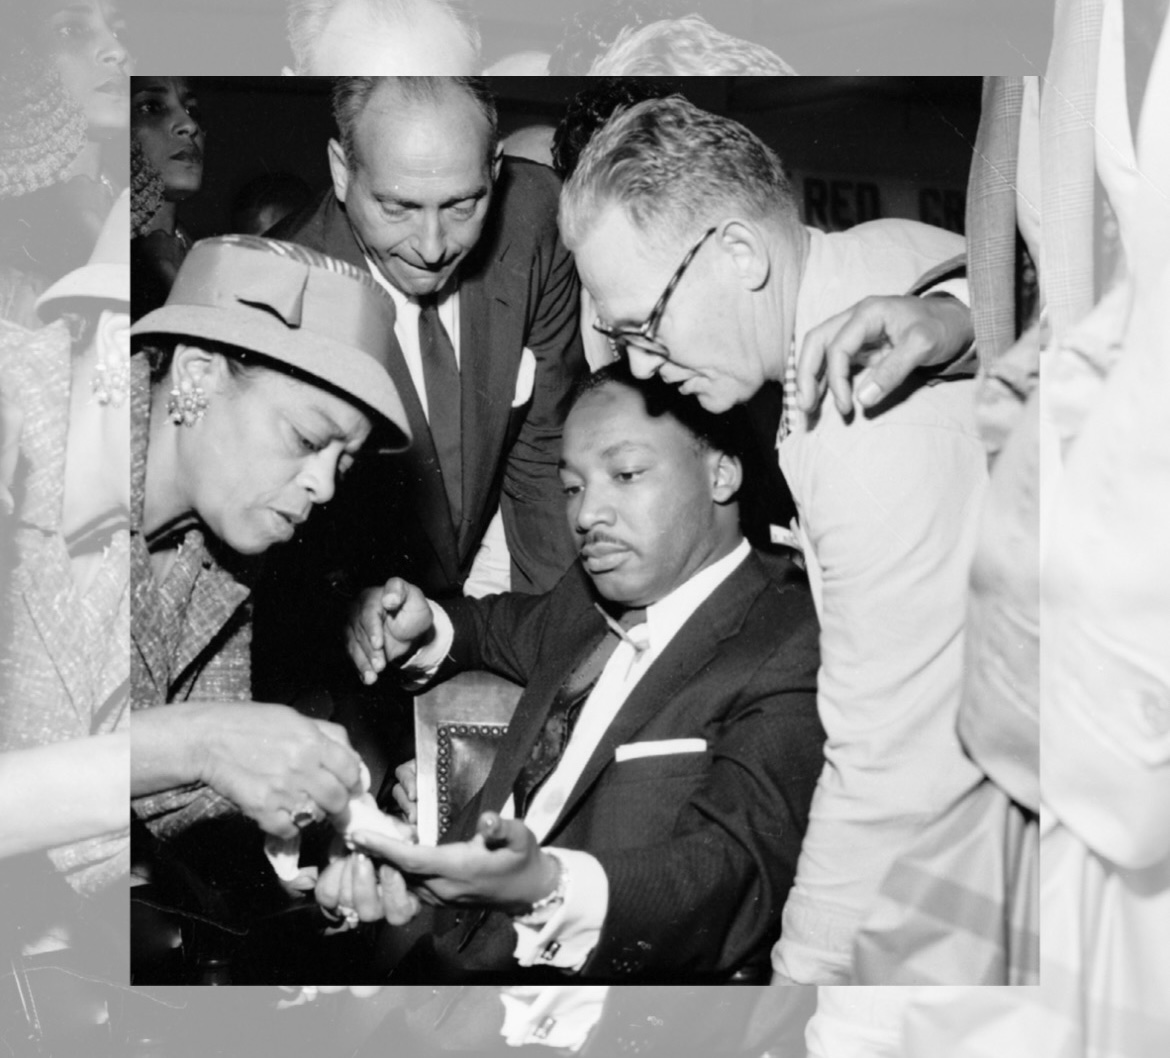 Dr. Martin Luther King, Jr. receives medical aid for a cut on his hand right after a failed assassination attempt.